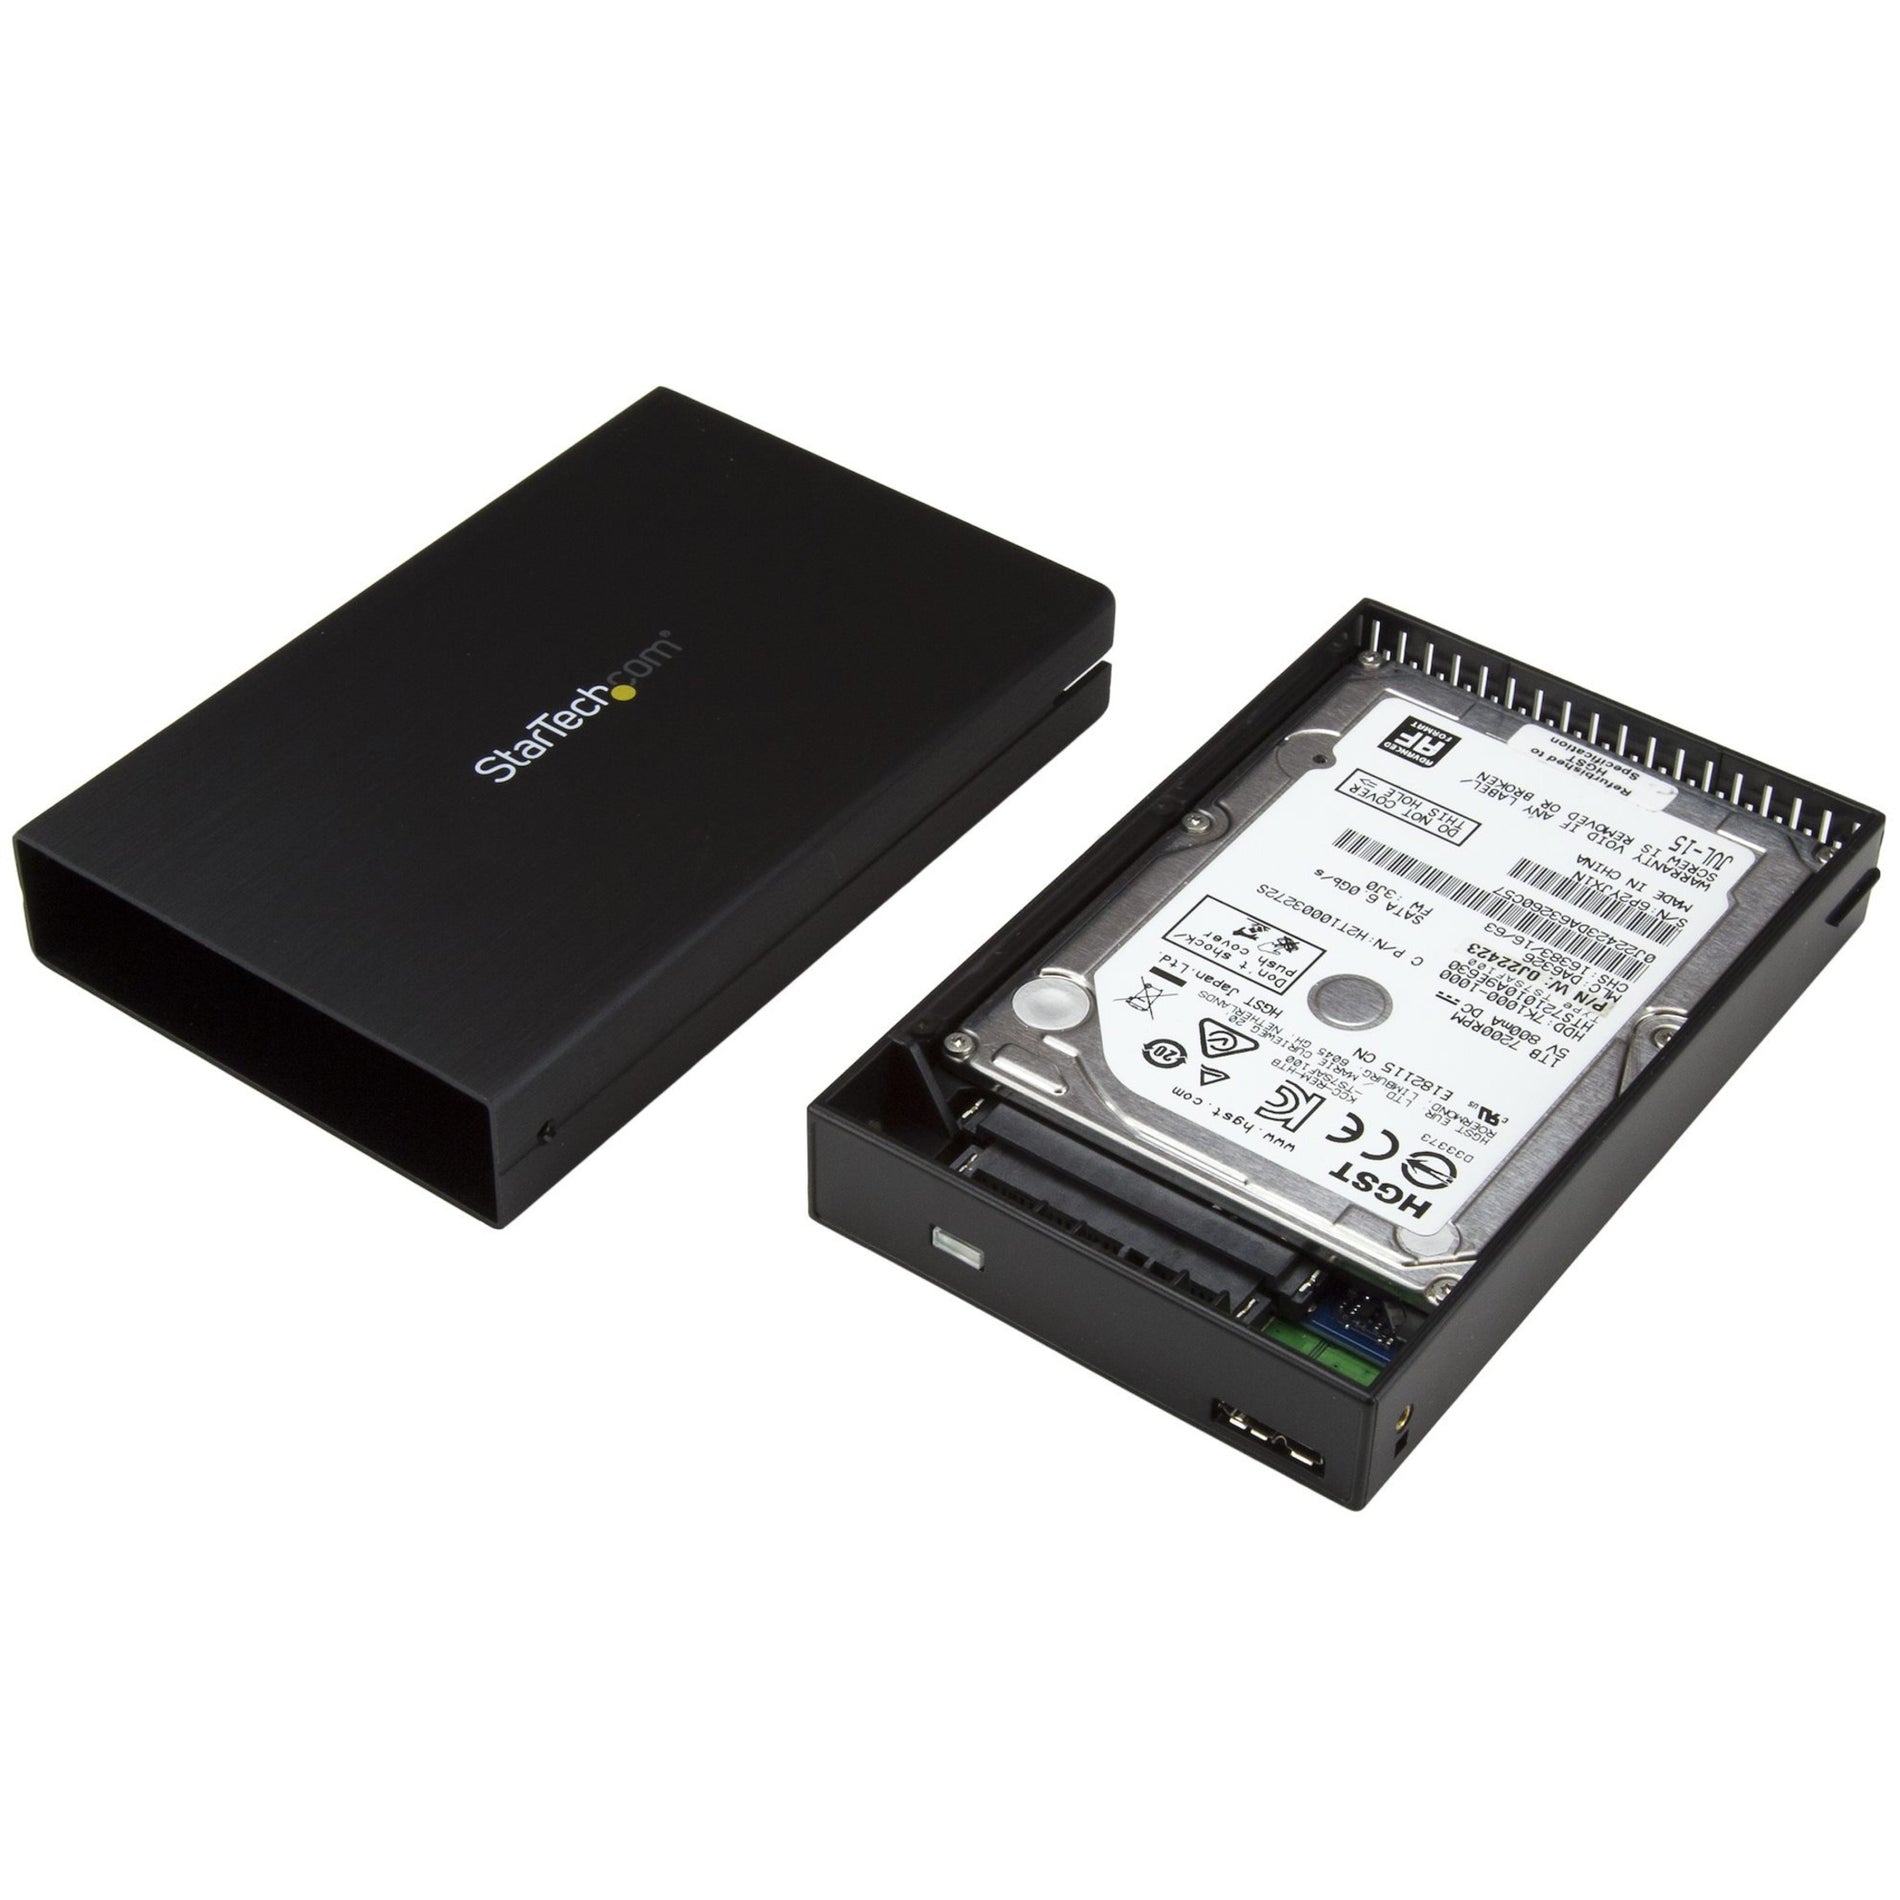 StarTech.com S251BU31315 Drive Enclosure for 2.5" SATA SSDs/HDDs - USB 3.1 (10Gbps) - USB-A USB-C, Supports 5mm to 15mm Drive Height